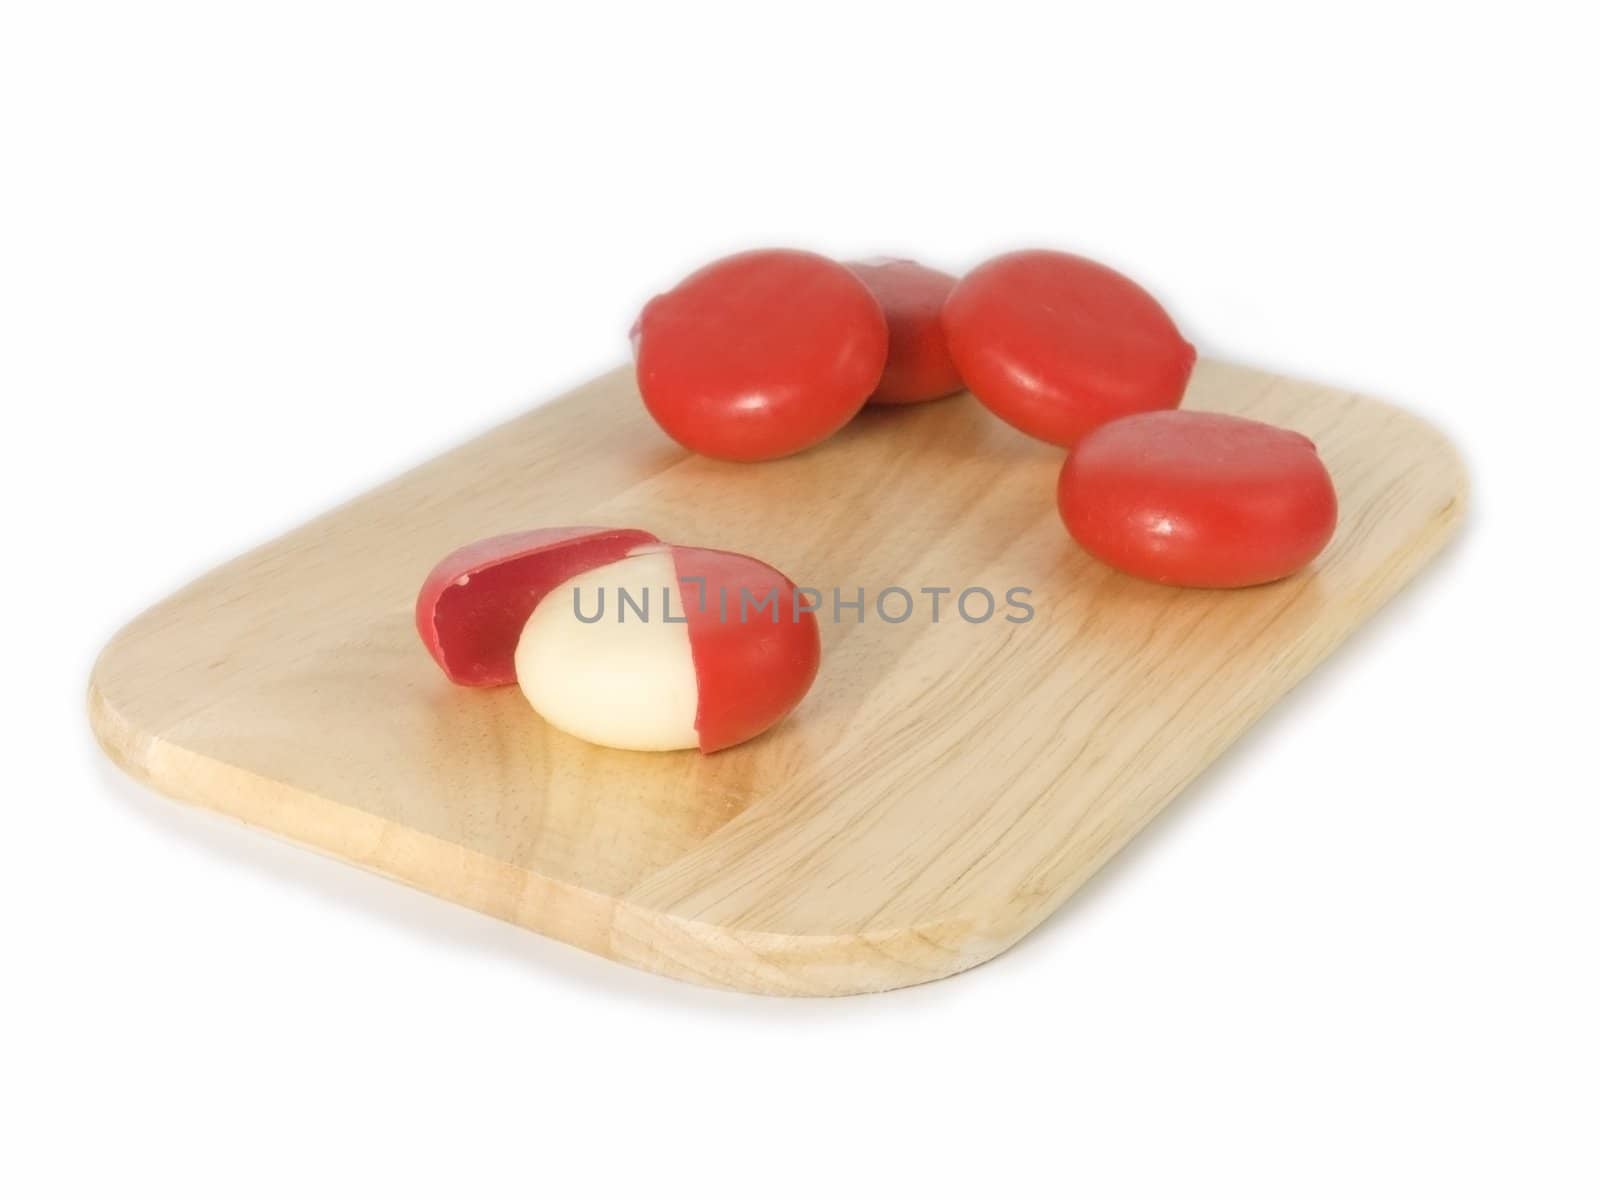 cheese and tomatoes on board isolated on white background